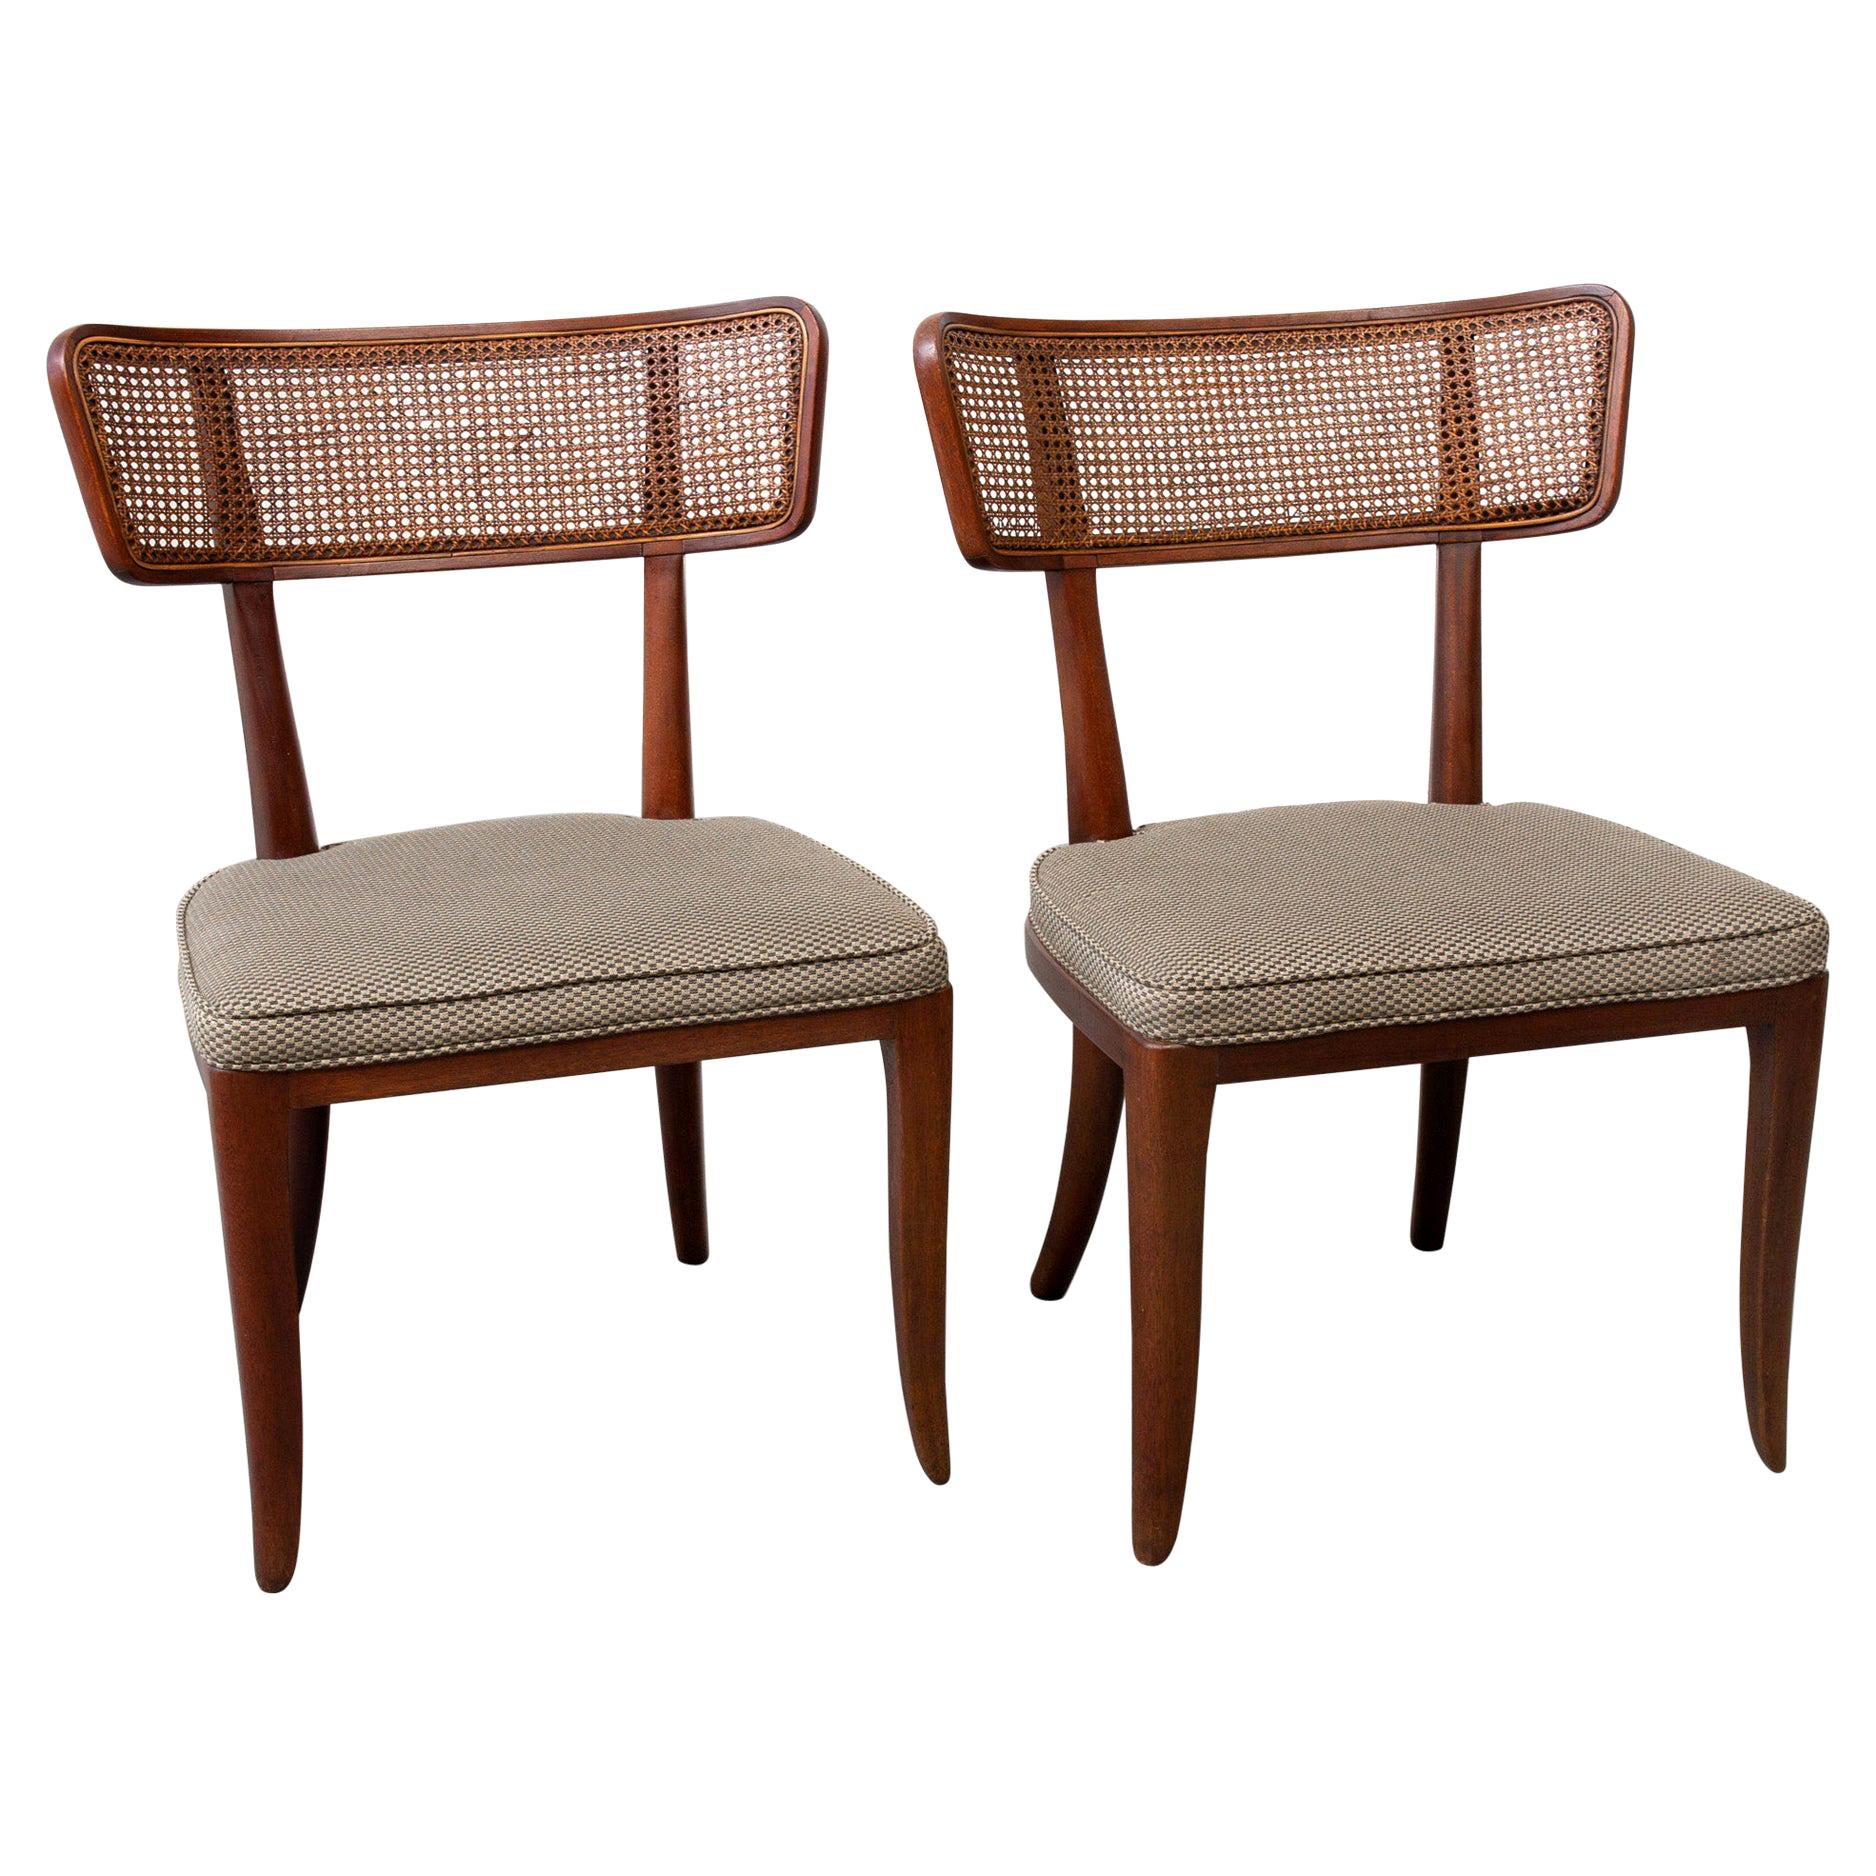 Pair of Ed Wormley Style Cane Back Side Chairs